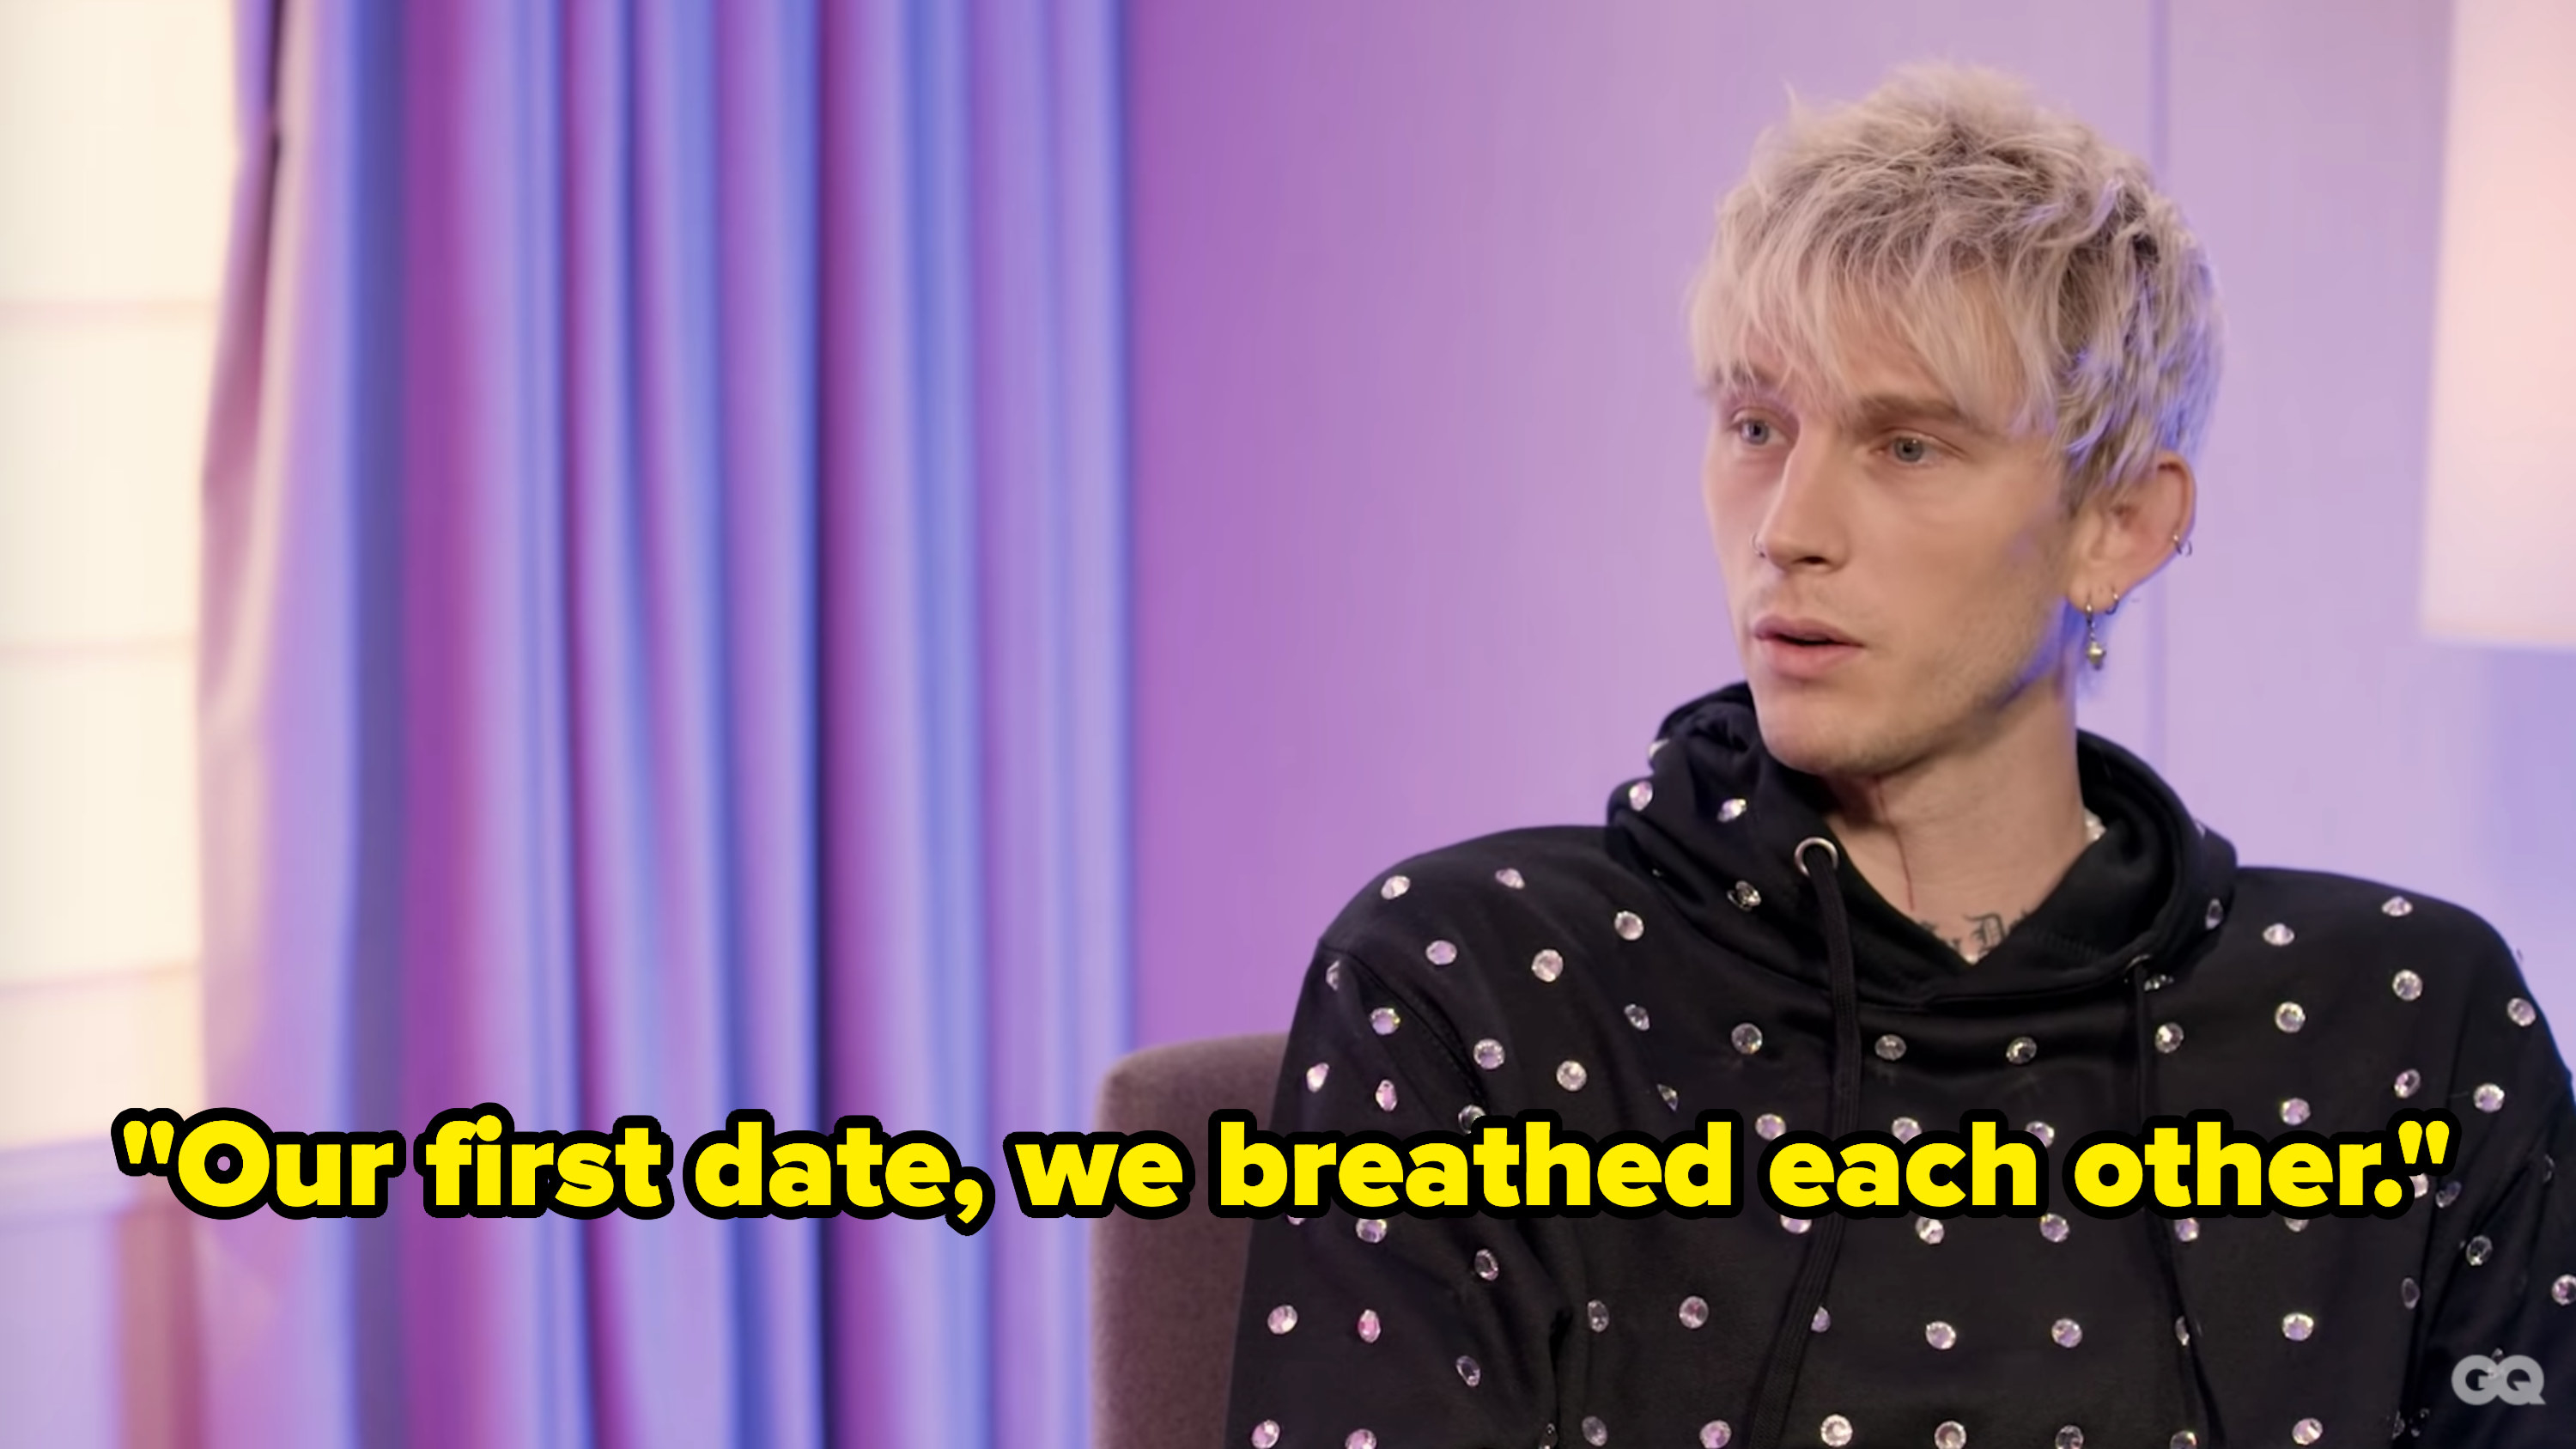 Machine Gun Kelly says "Our first date, we breathed each other"